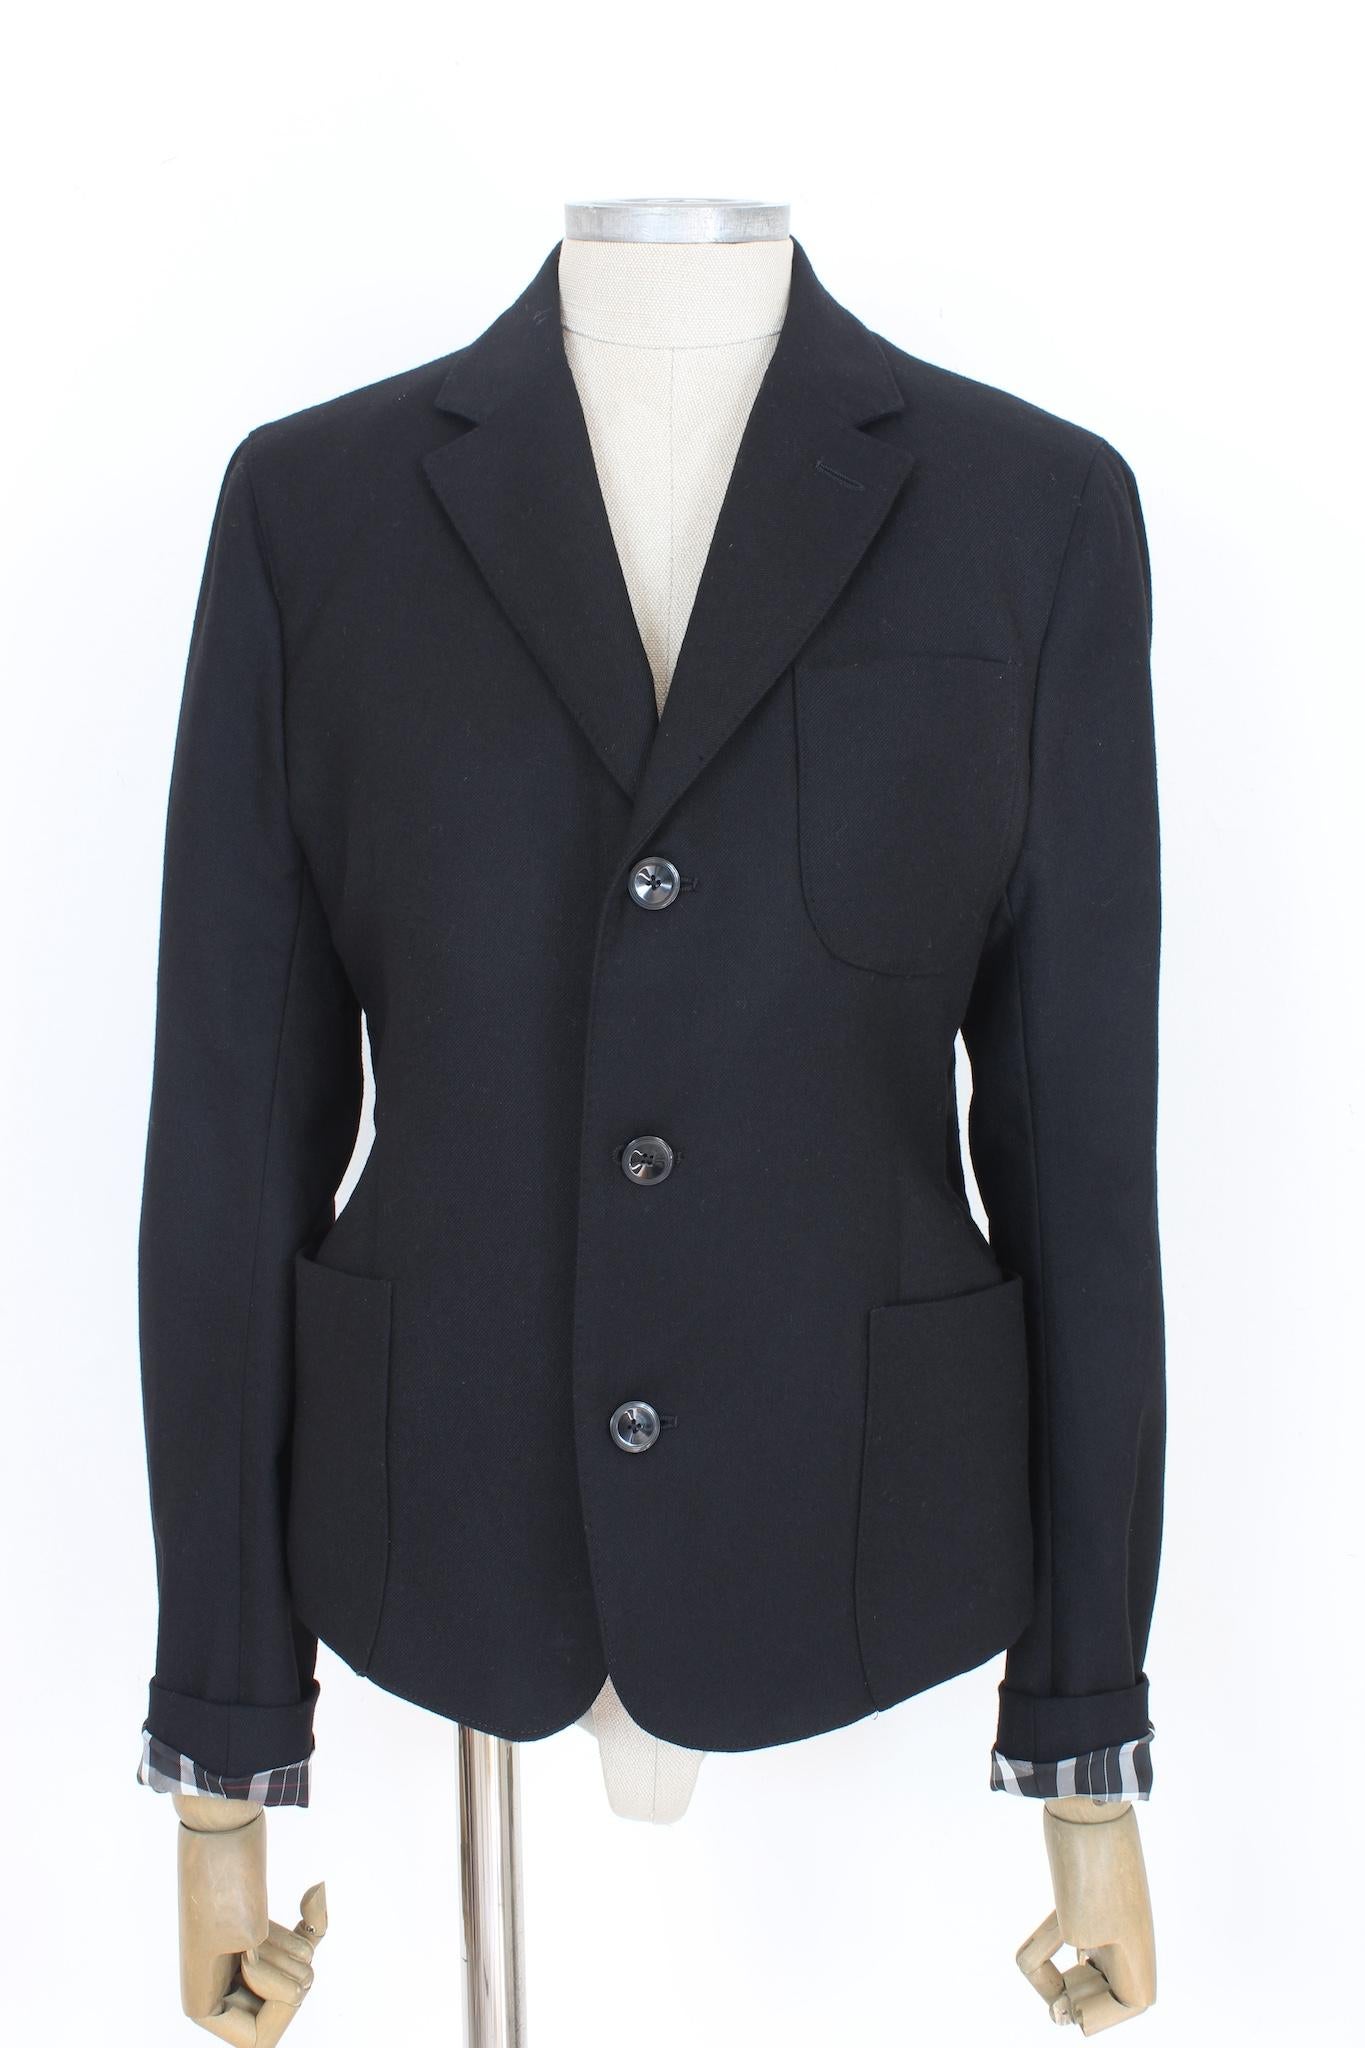 Featuring a sleek fitted design, this Alexander McQueen black wool jacket from the 2000s boasts a unique gold-colored zip running along the entire back. Composed of high-quality wool, this black blazer is a standout piece with a subtle touch of